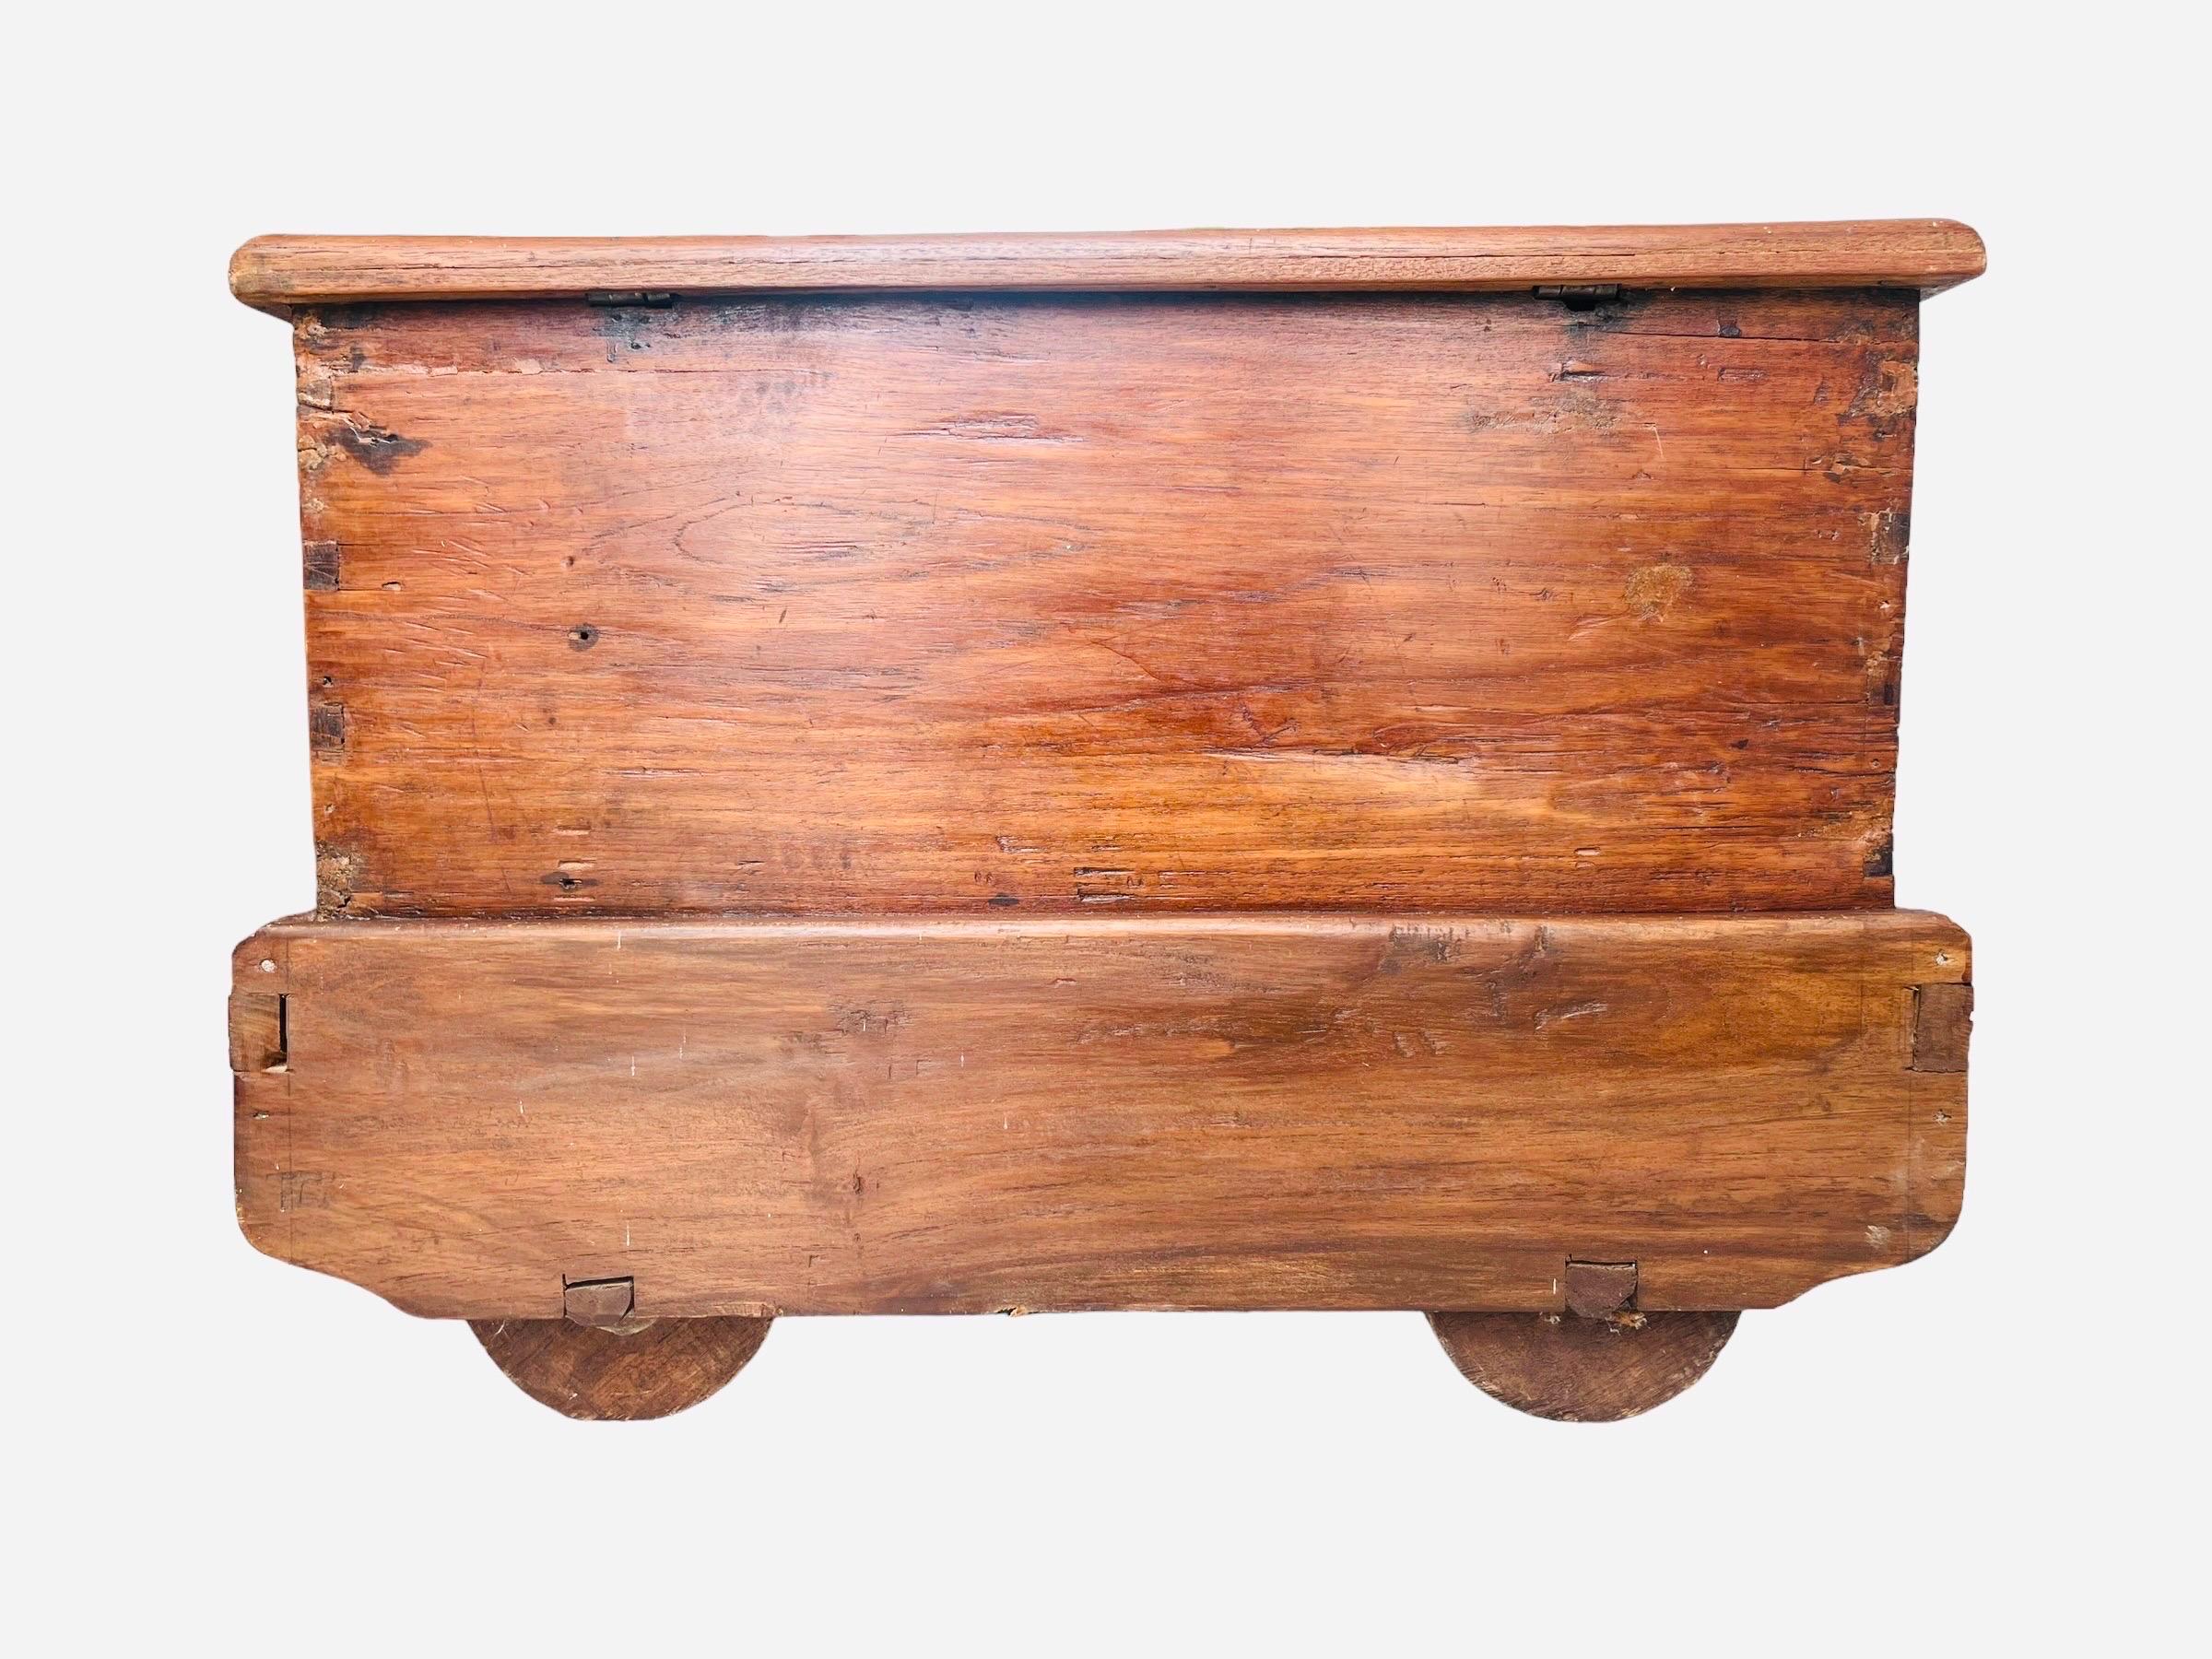 Merchant's Chest on wheels in carved and painted wood - Madura Indonesia 19th For Sale 2